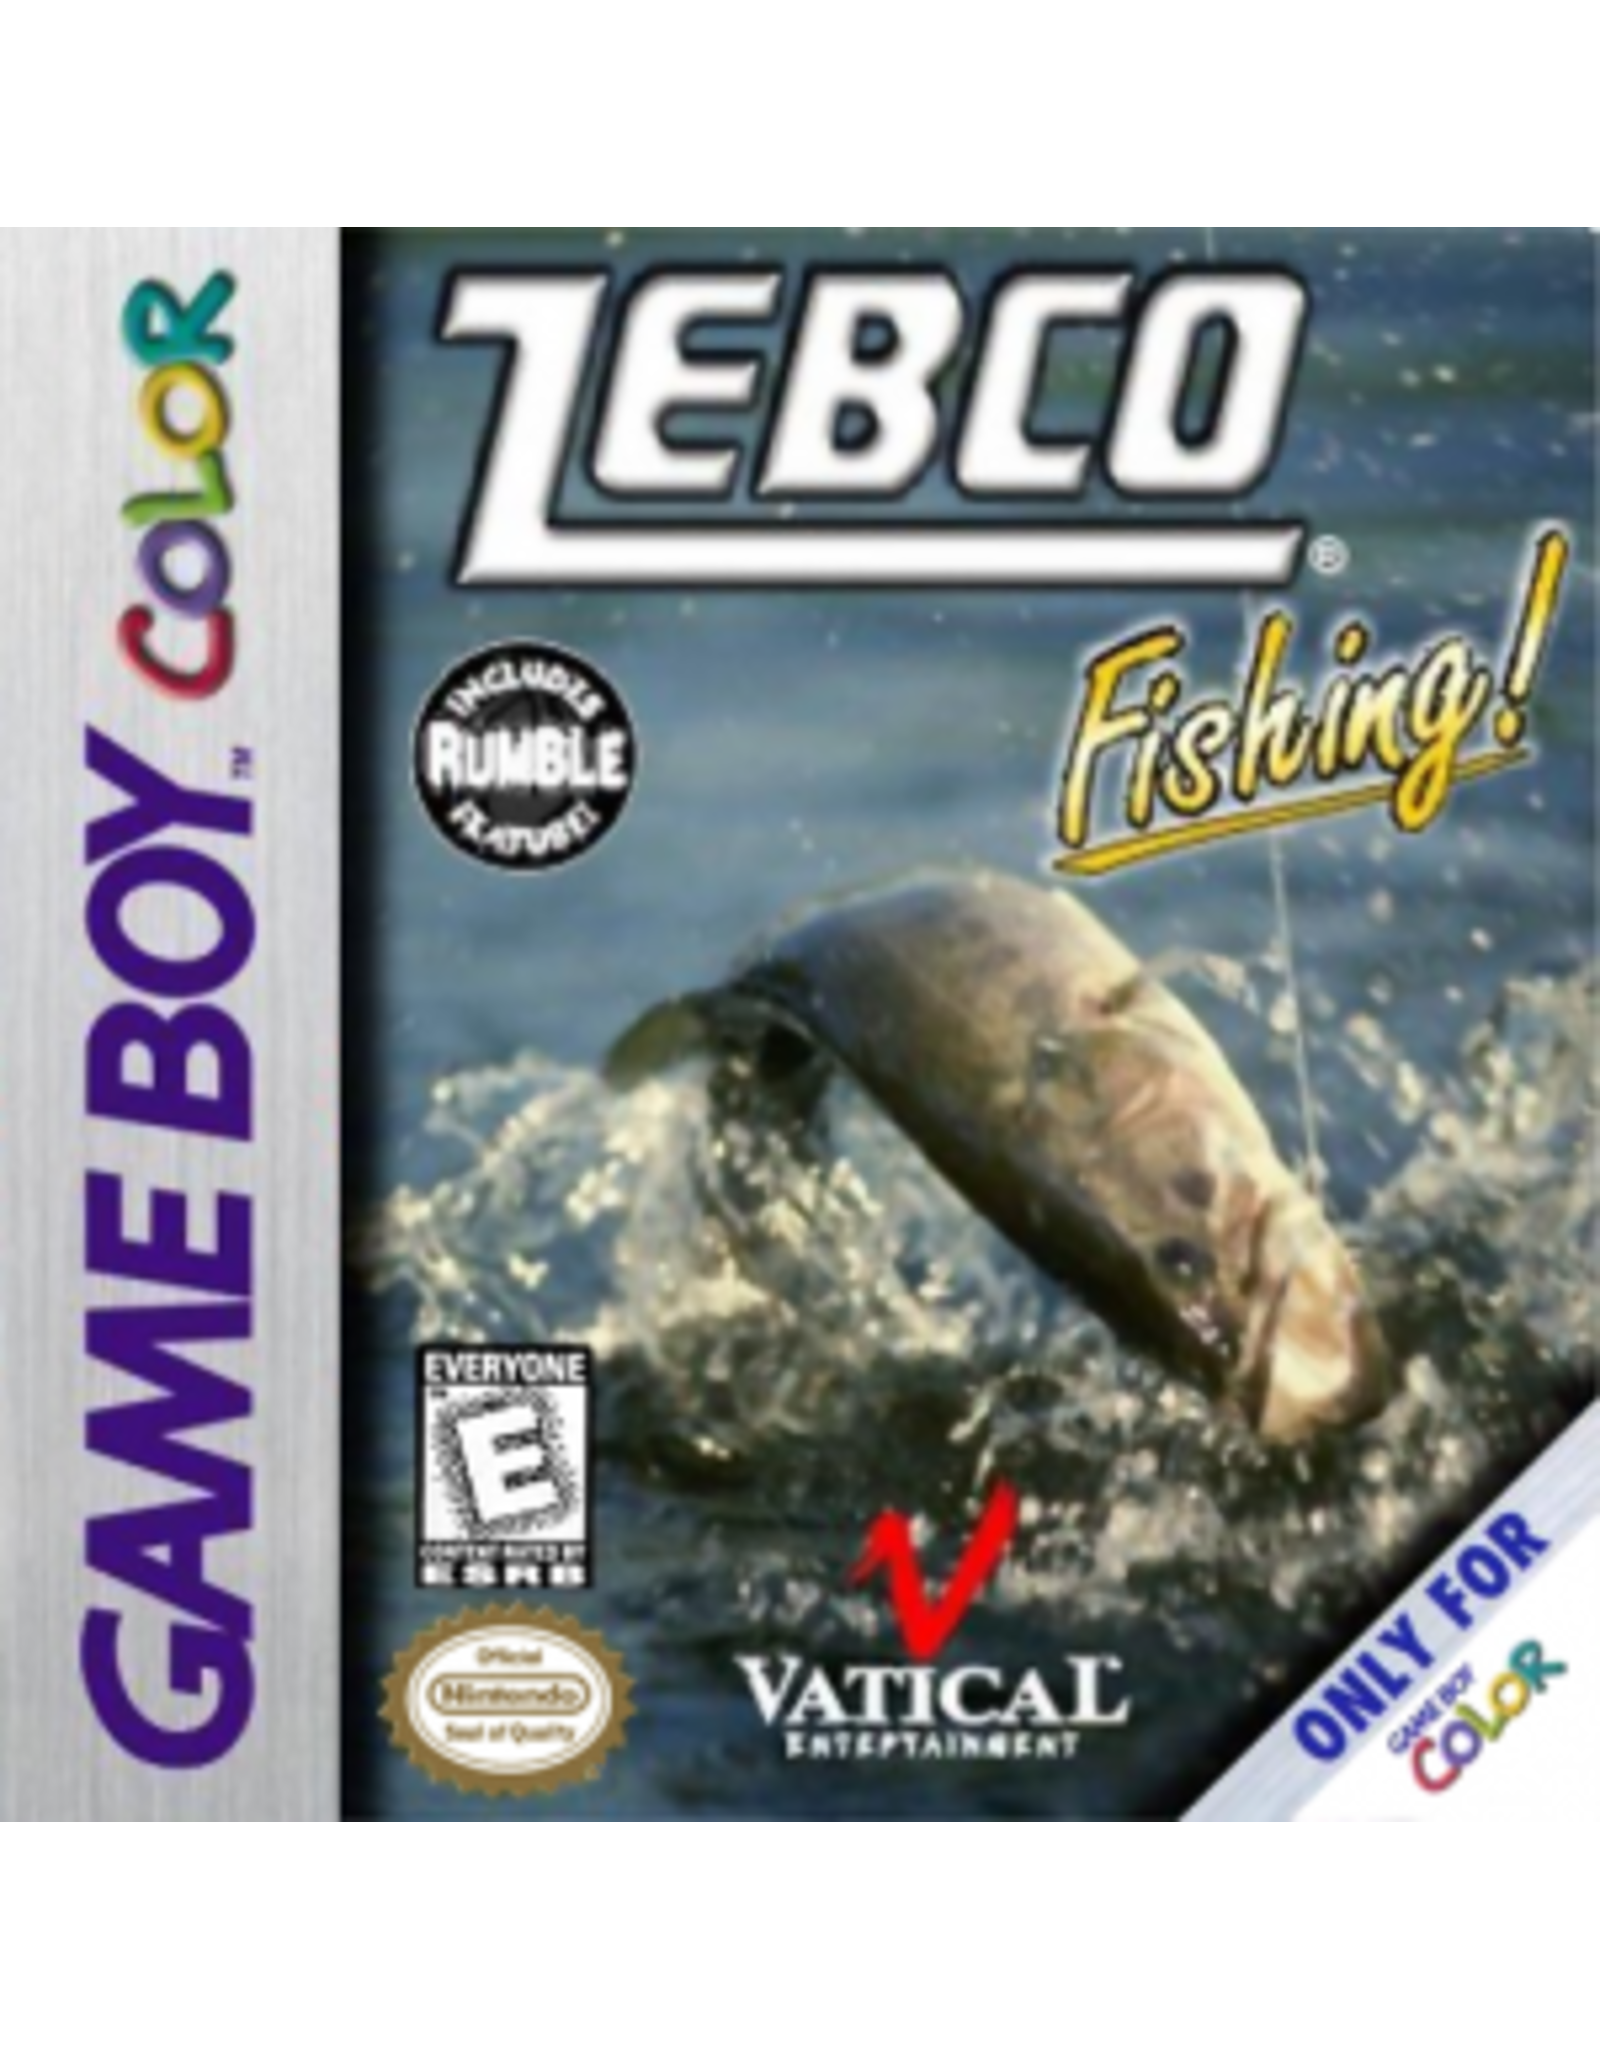 Game Boy Color Zebco Fishing (Cart Only) - Video Game Trader